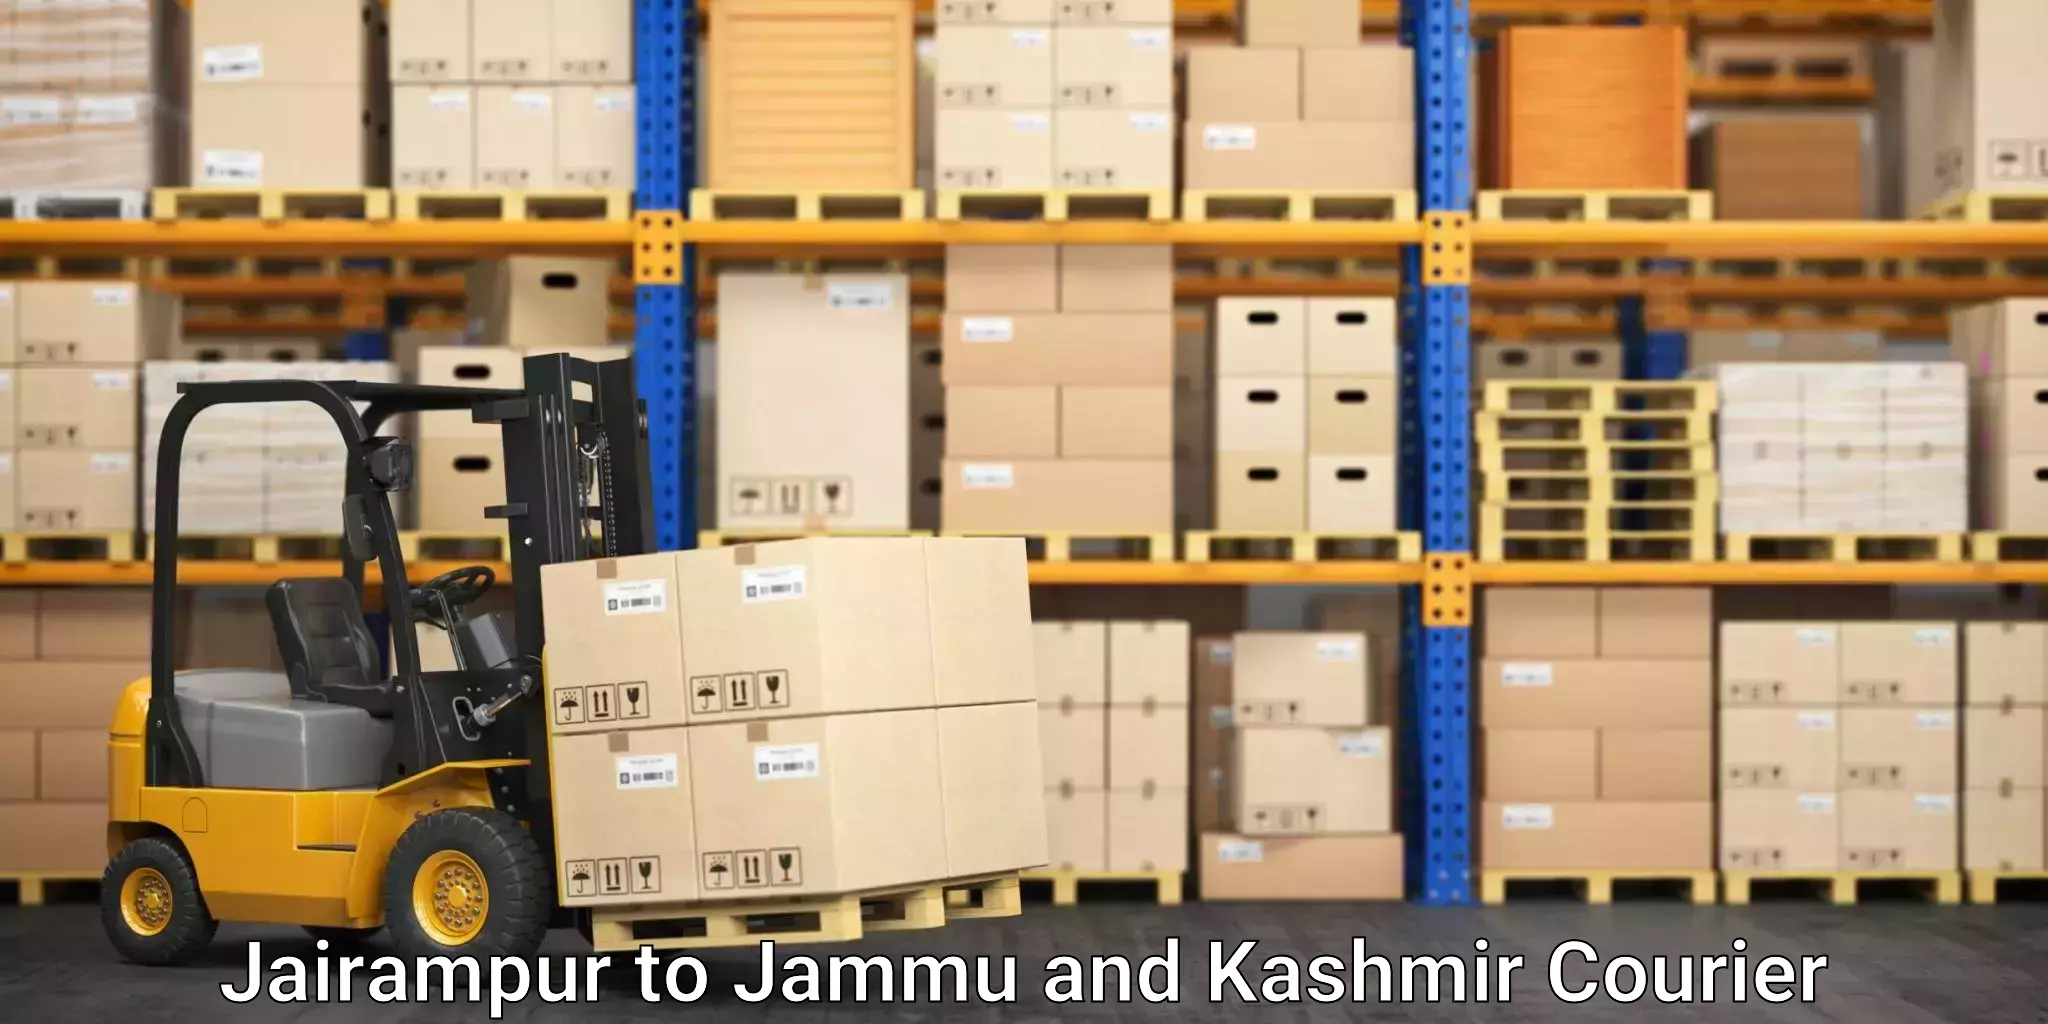 Reliable delivery network Jairampur to Shopian